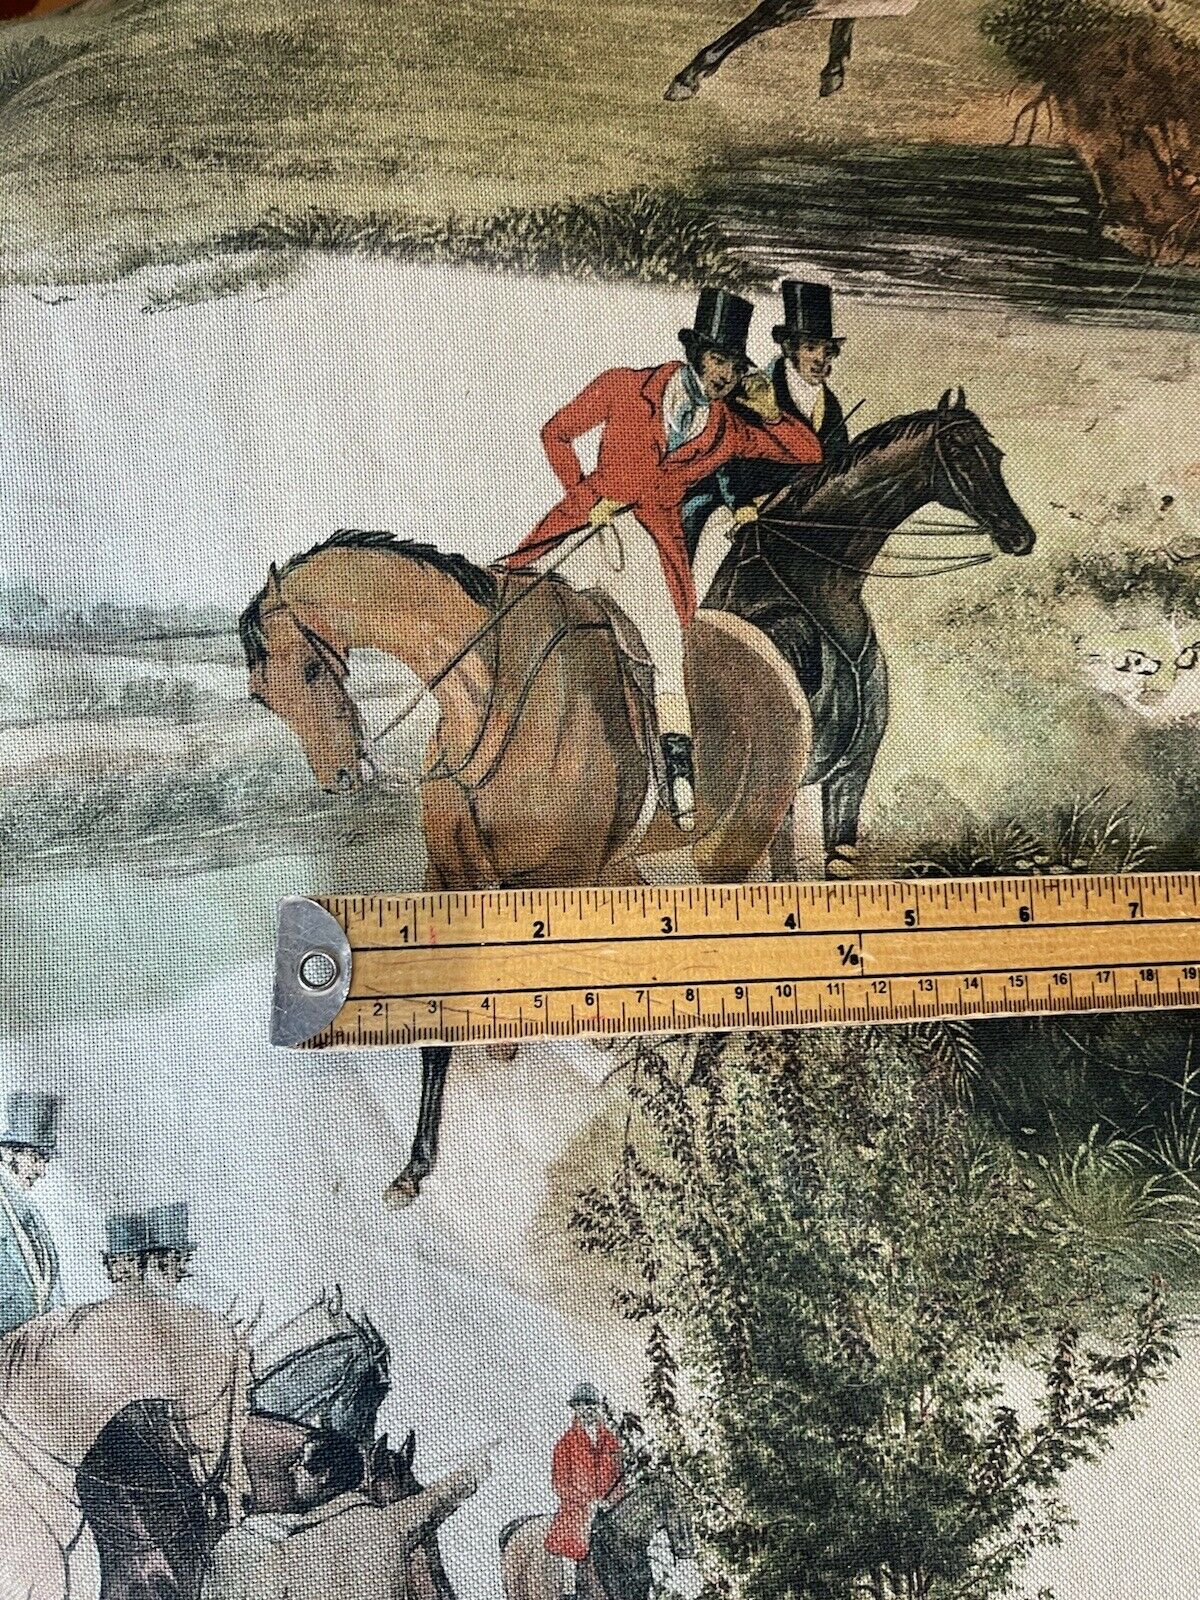 English Fox Hunting Printed Cotton Fabric By Meter Horses Sewing Material Dog Fox Pattern For Curtains Pillows Cushions Landscape Forest Pointer